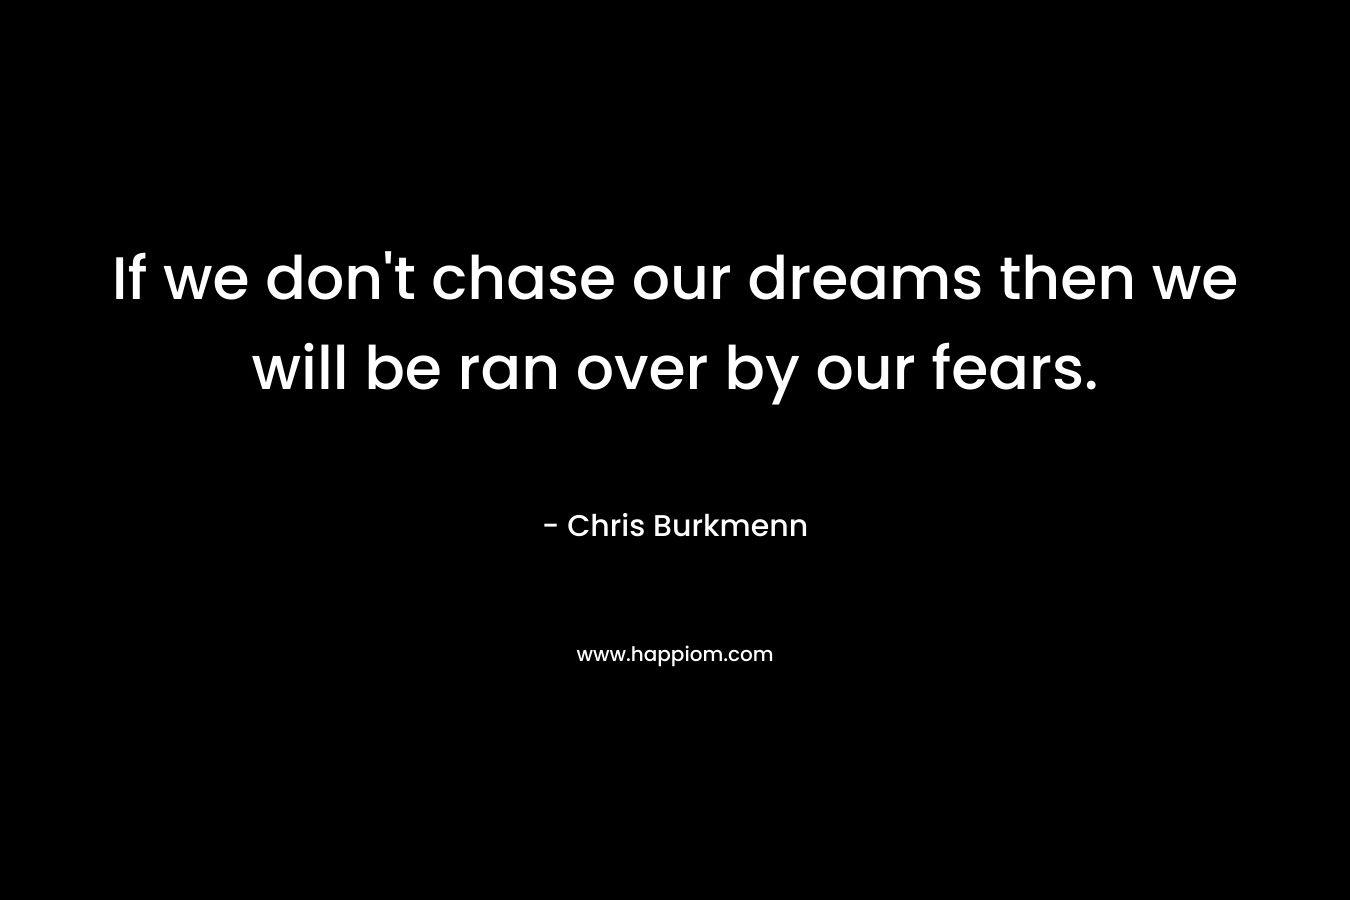 If we don’t chase our dreams then we will be ran over by our fears. – Chris Burkmenn